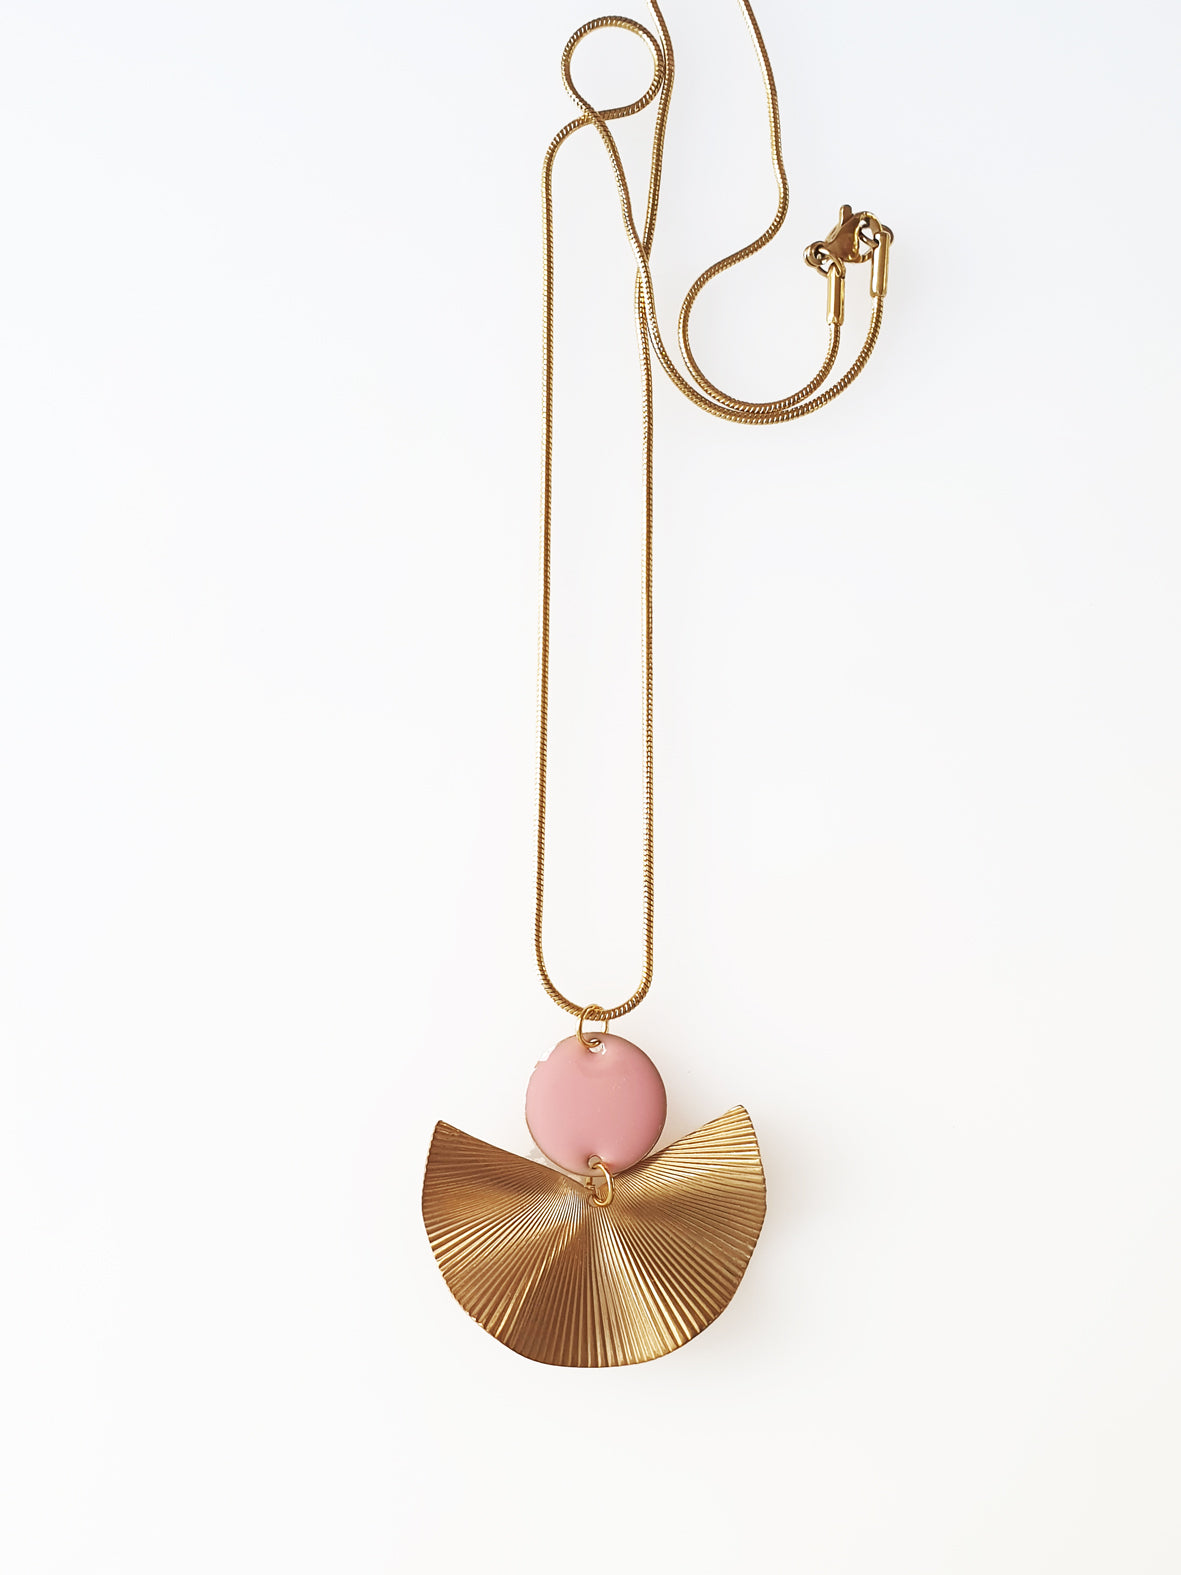 A necklace sits against a white background. It features a gold chain, a pink enamel connector dot and a textured brass fan piece.